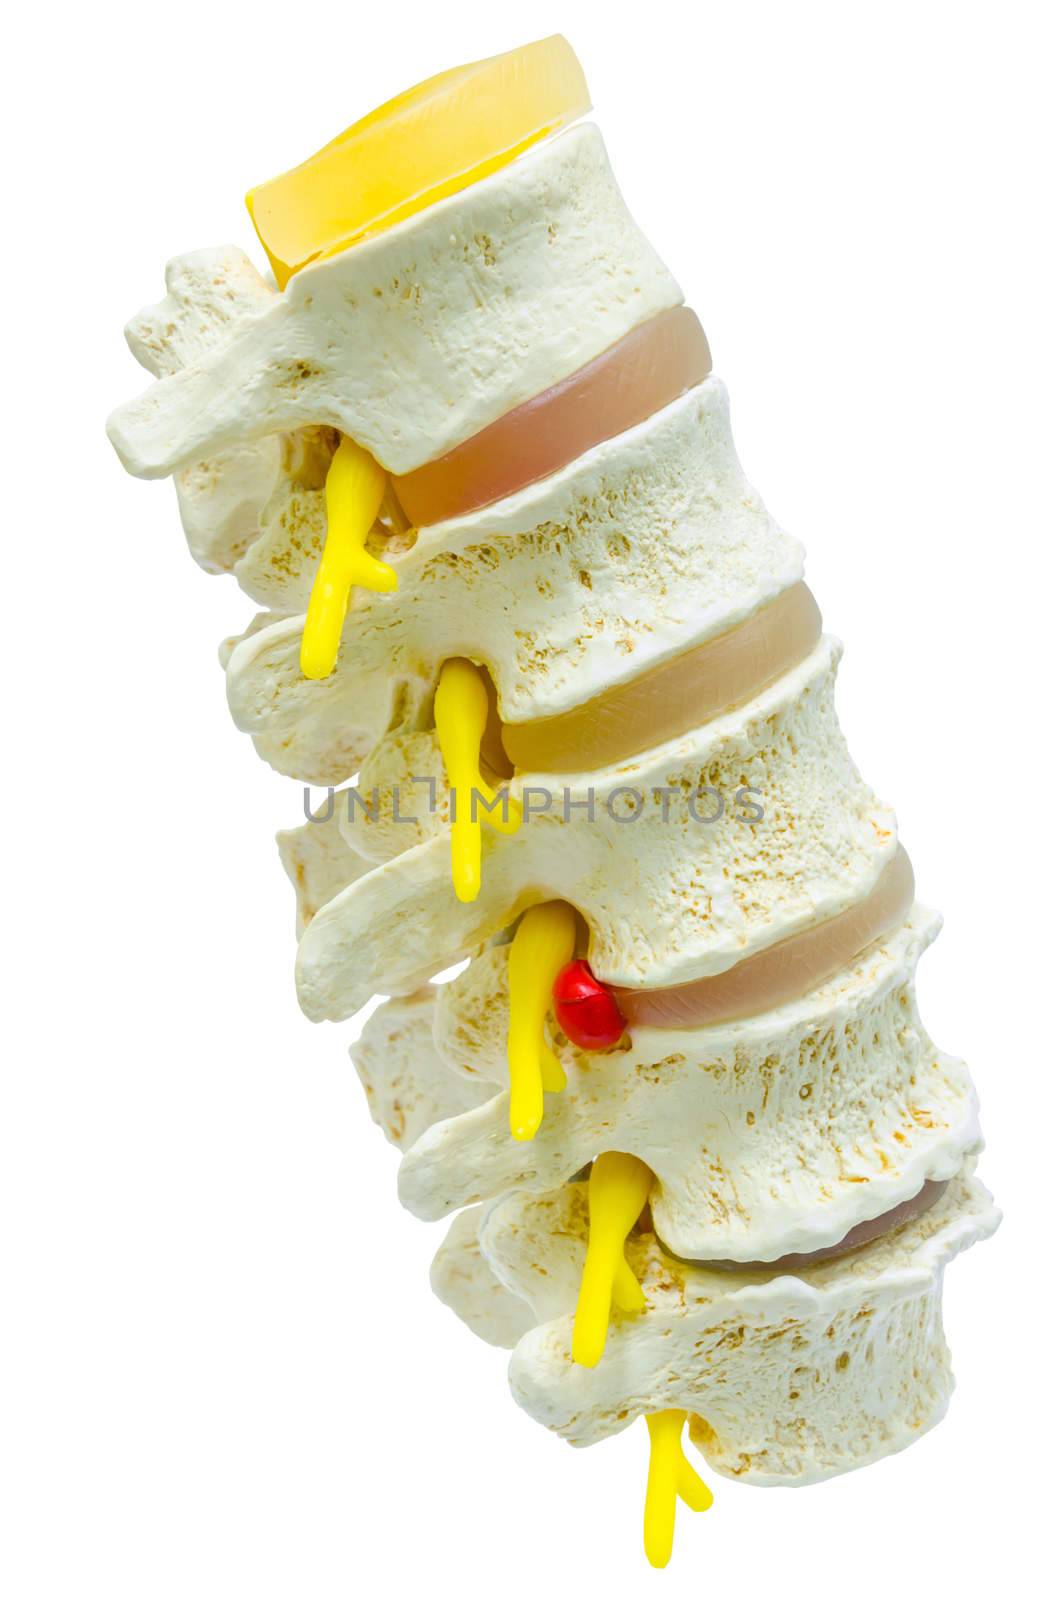 A close-up of a lumbar part of a spine preparation over white ba by Gamjai